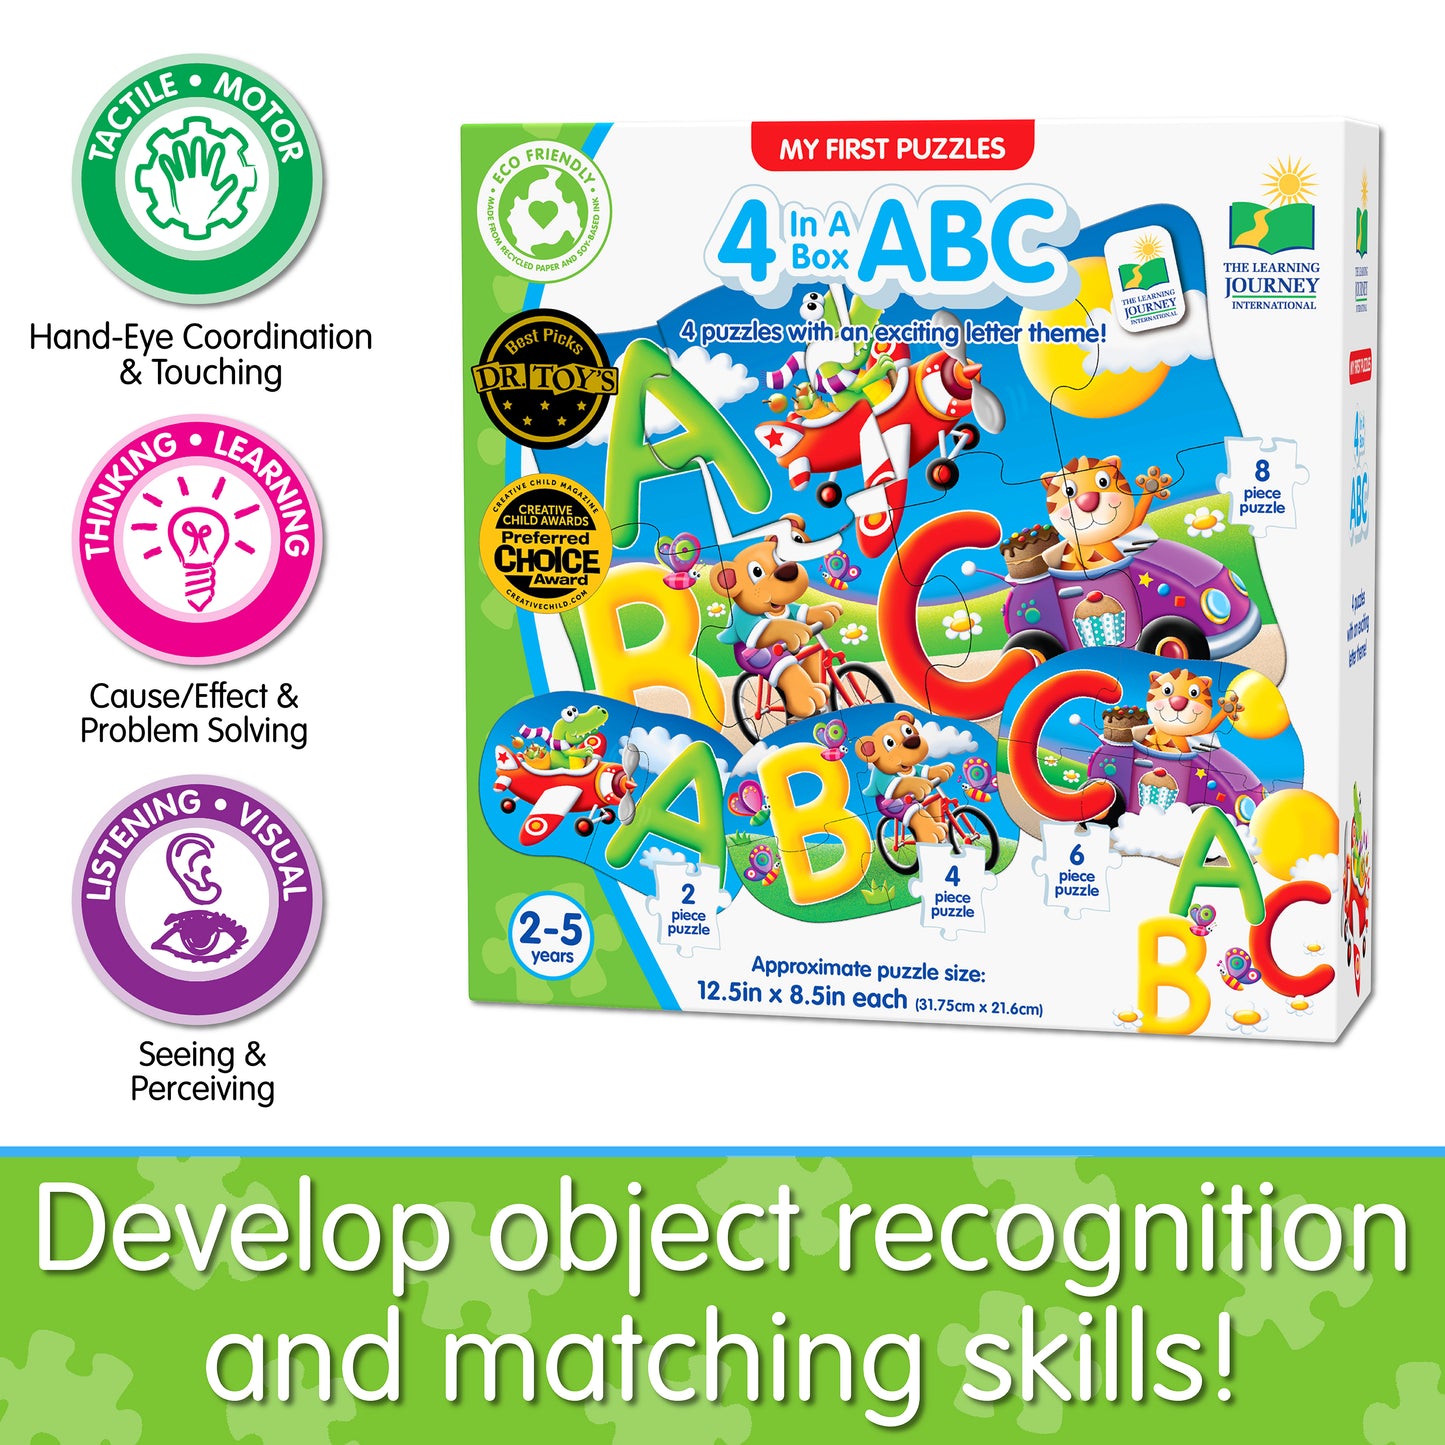 Infographic about 4-In-A-Box ABC Puzzle's educational benefits that says, "Develop object recognition and matching skills!"